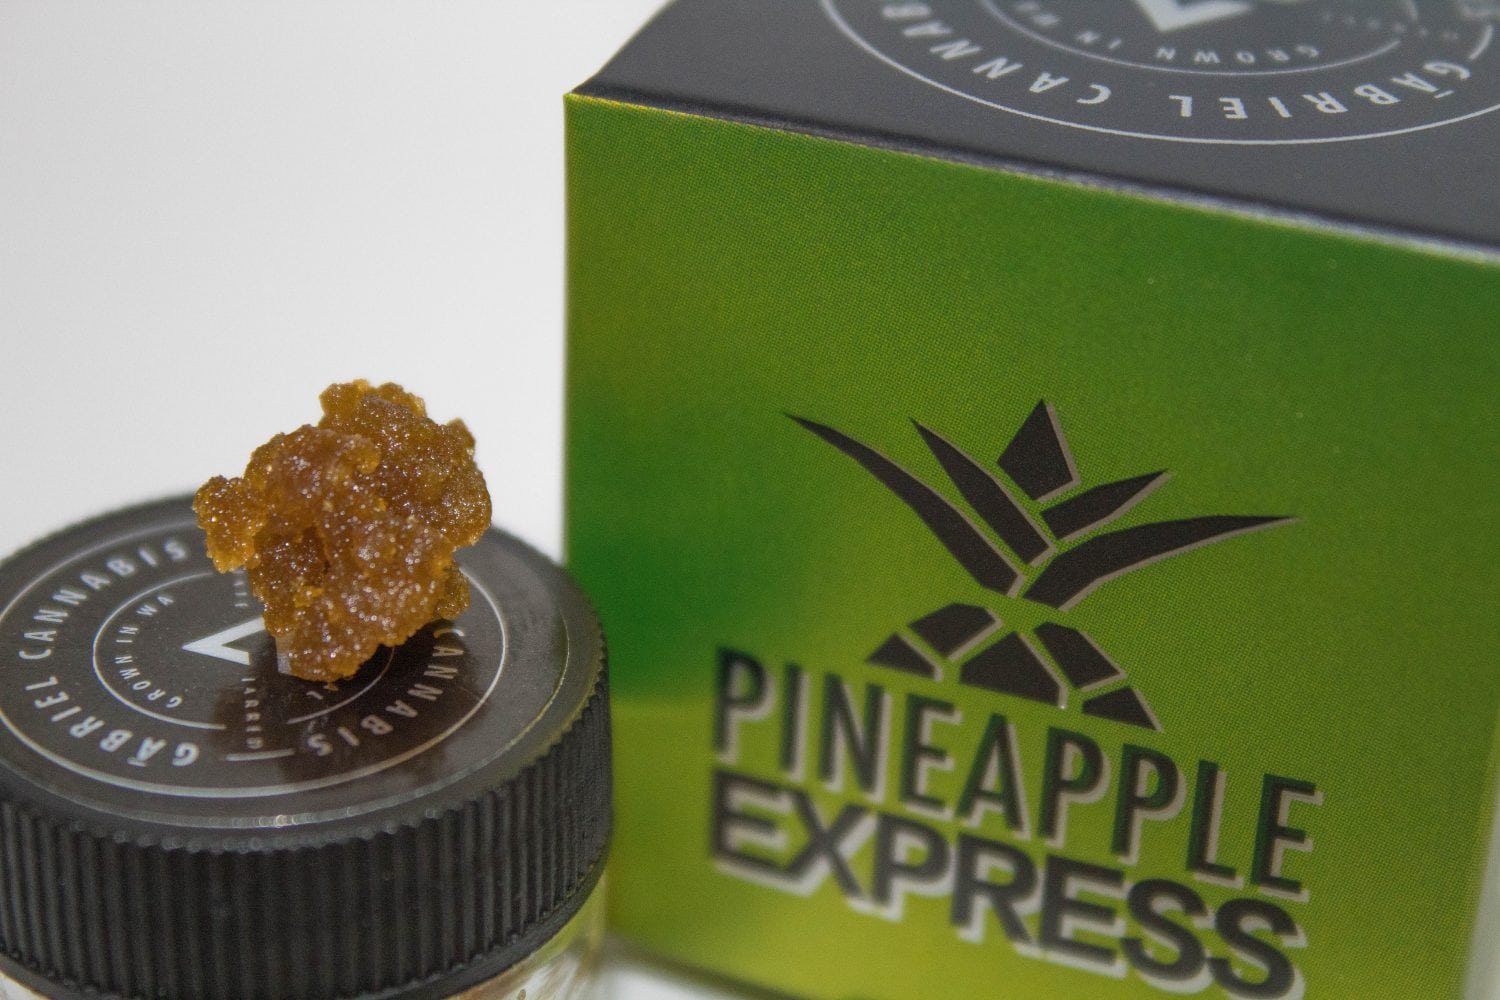 Pineapple Express by Gabriel